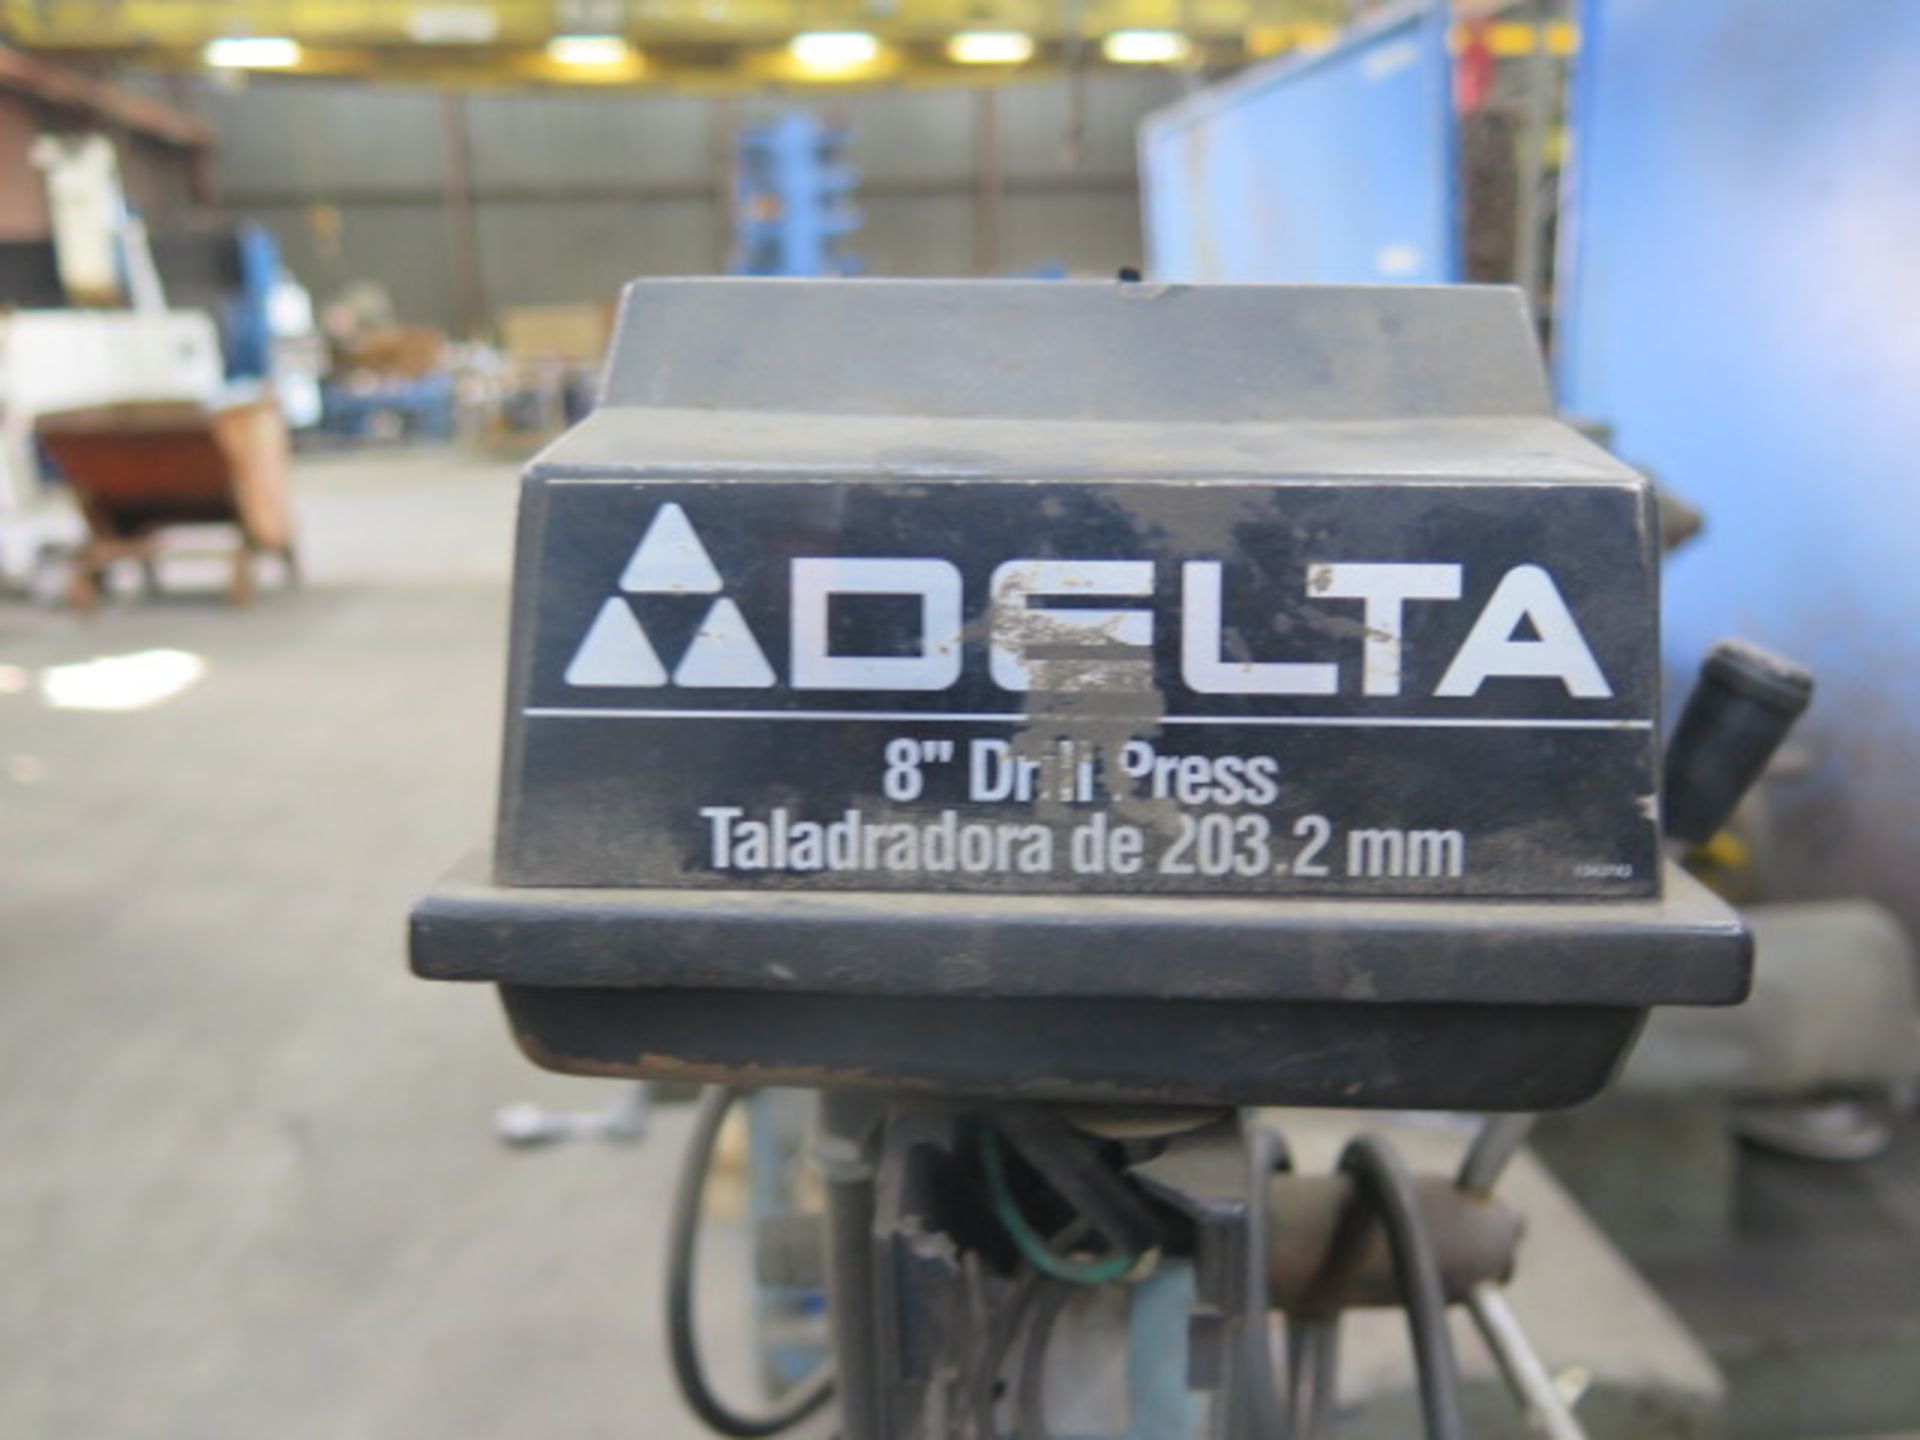 30 1/2" x 39 1/2" Steel Table w/ Delta 8" Drill Press (SOLD AS-IS - NO WARRANTY) - Image 4 of 5